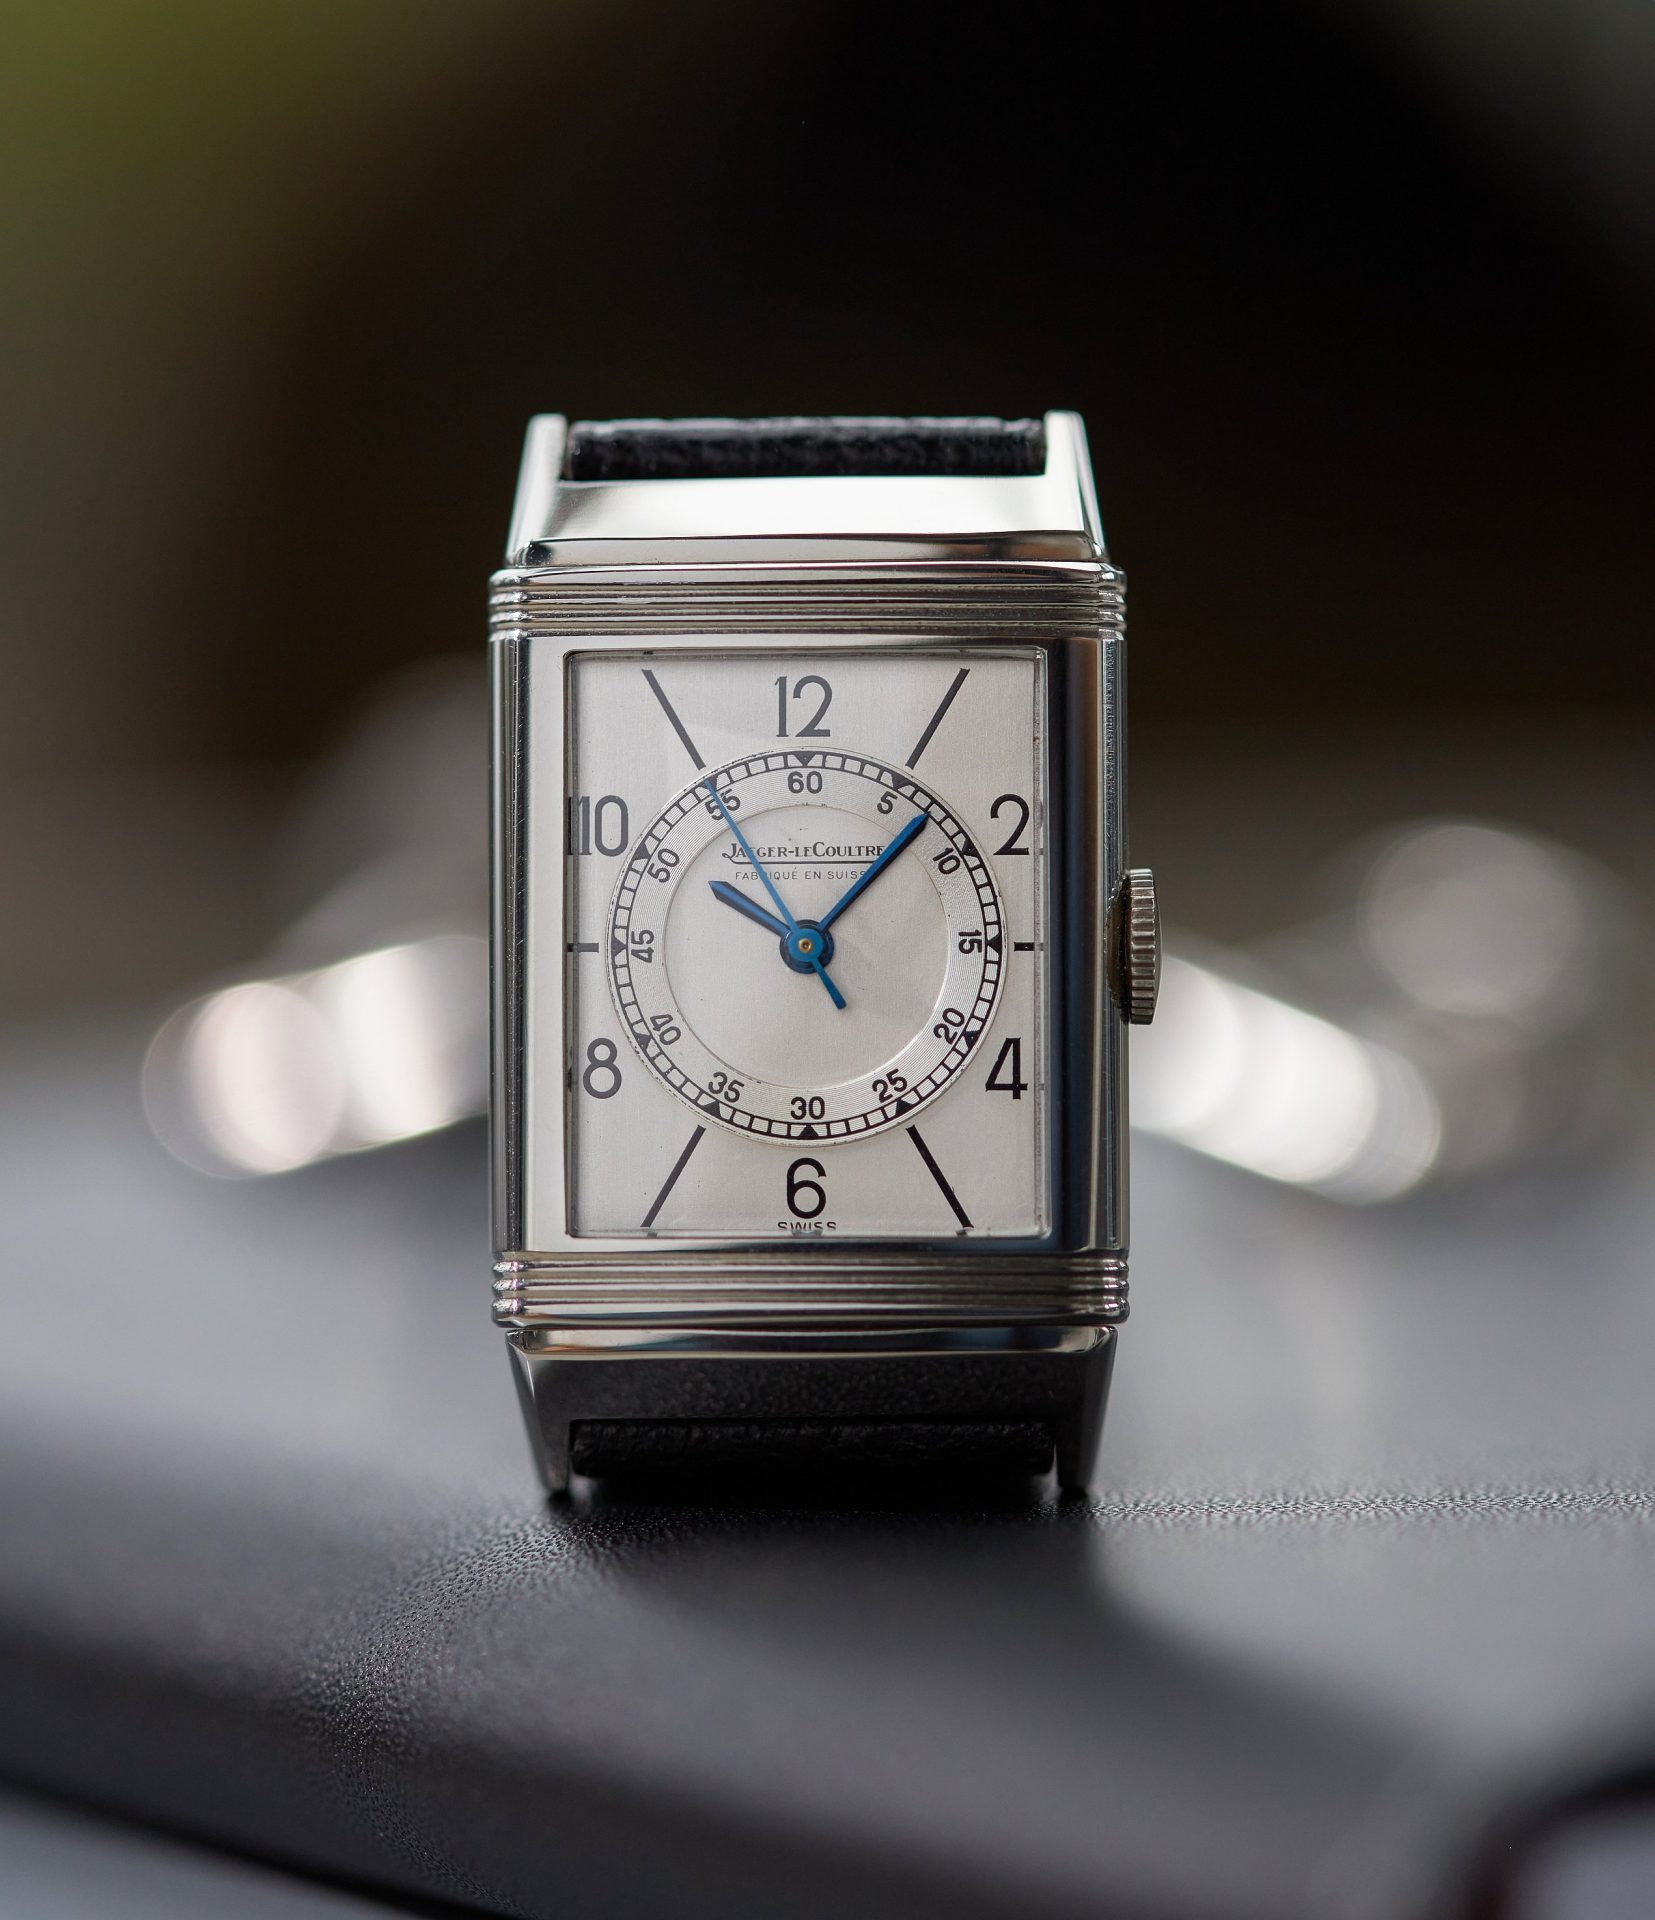 White dial Jaeger-LeCoultre Reverso from 1933 with Order of the Thistle emblem on caseback in The Flippin’ History of the Reverso for A Collected Man